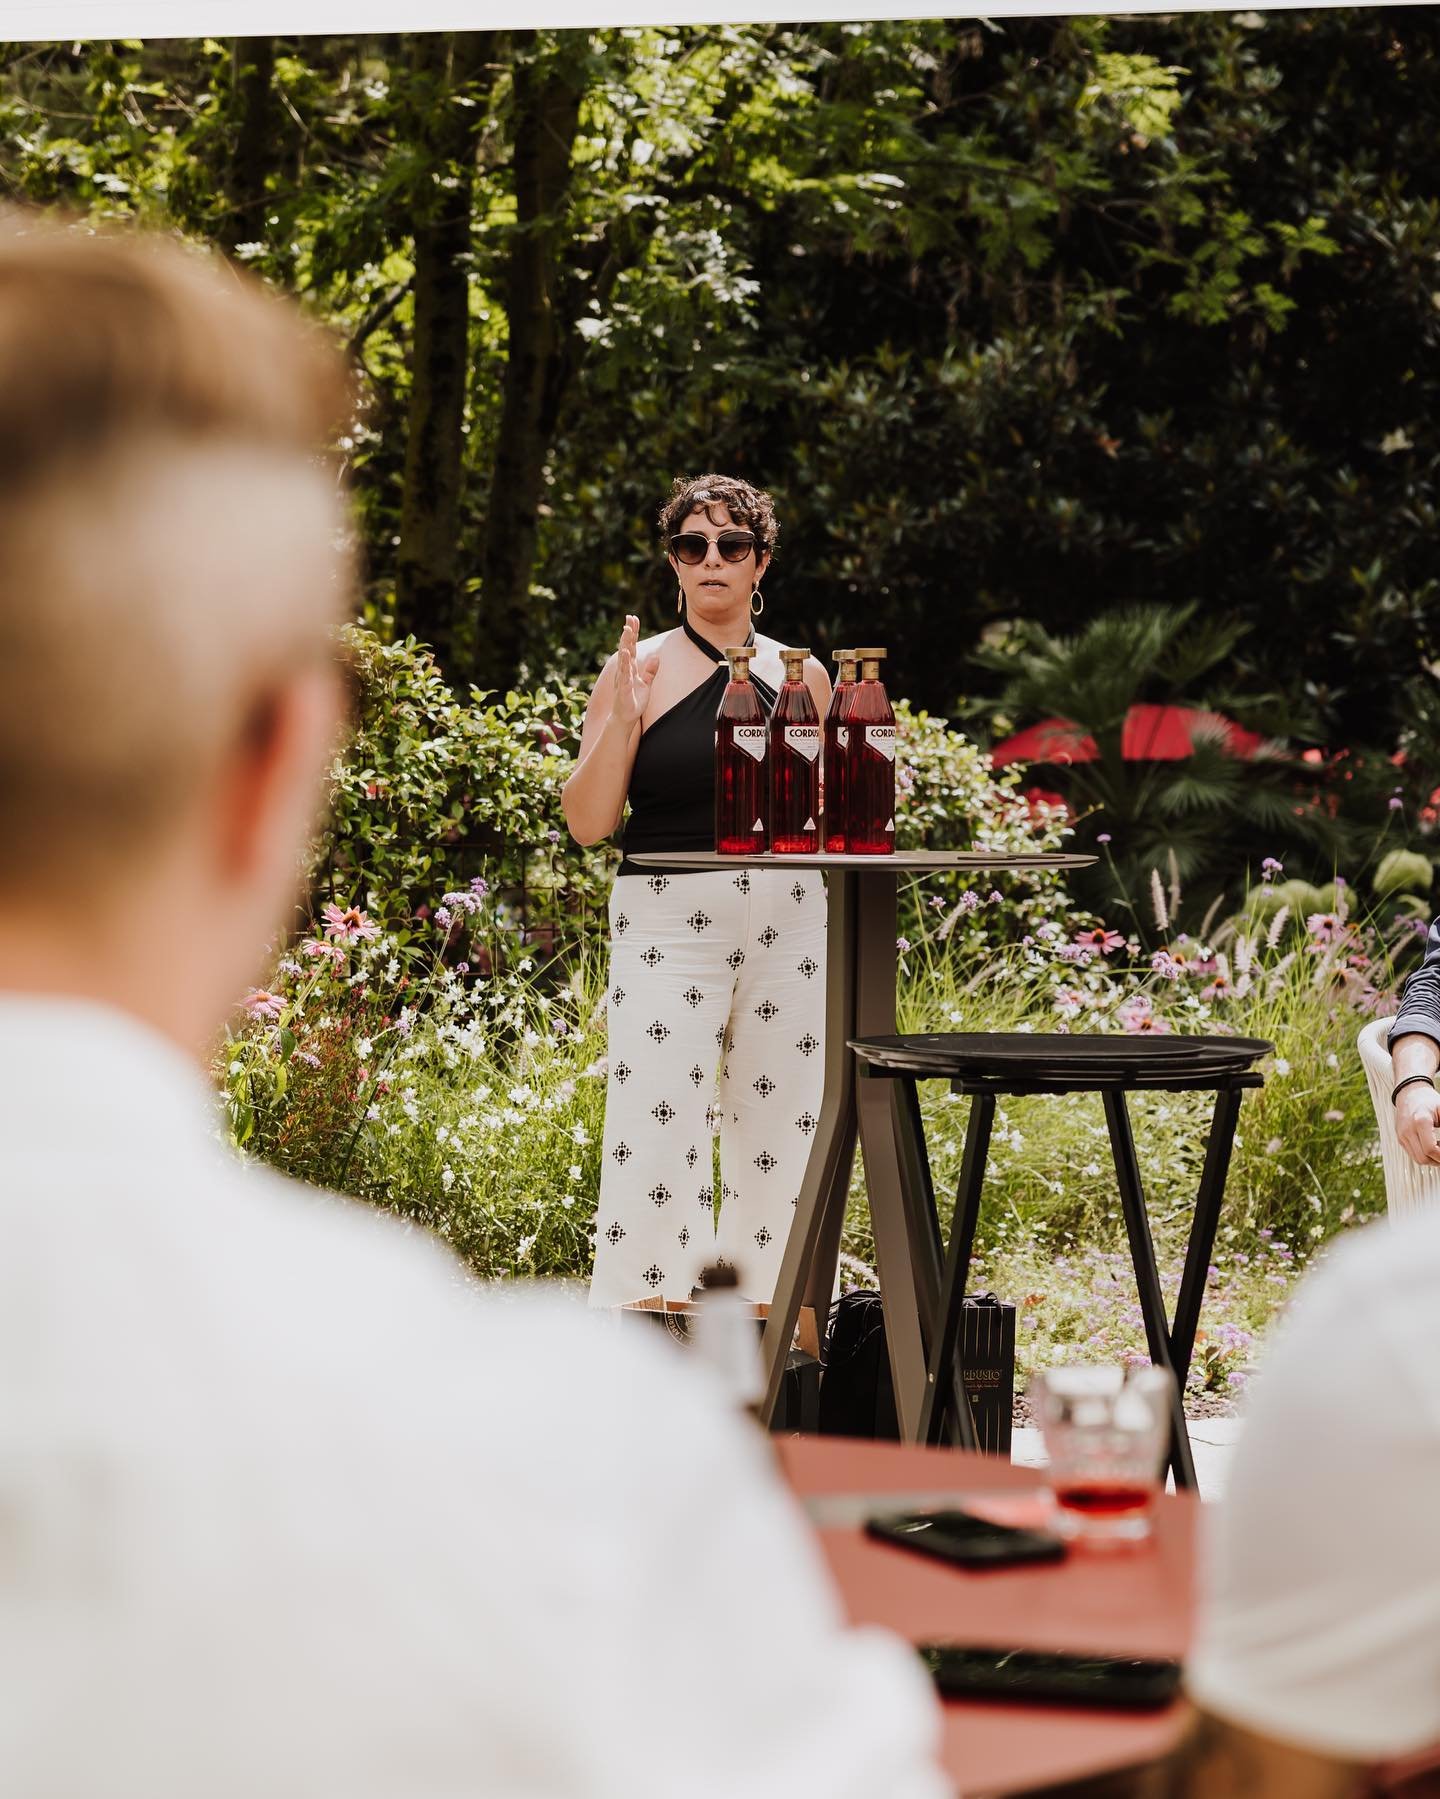 Suddenly our Competition turned&hellip; Red! While our bartender where competing, on the other side of the garden we hosted a @cordusiospirits masterclass at @sheratonlakecomo to discover all the secrets behind the red berry aperitivo! 

#CLCW #CLCW2